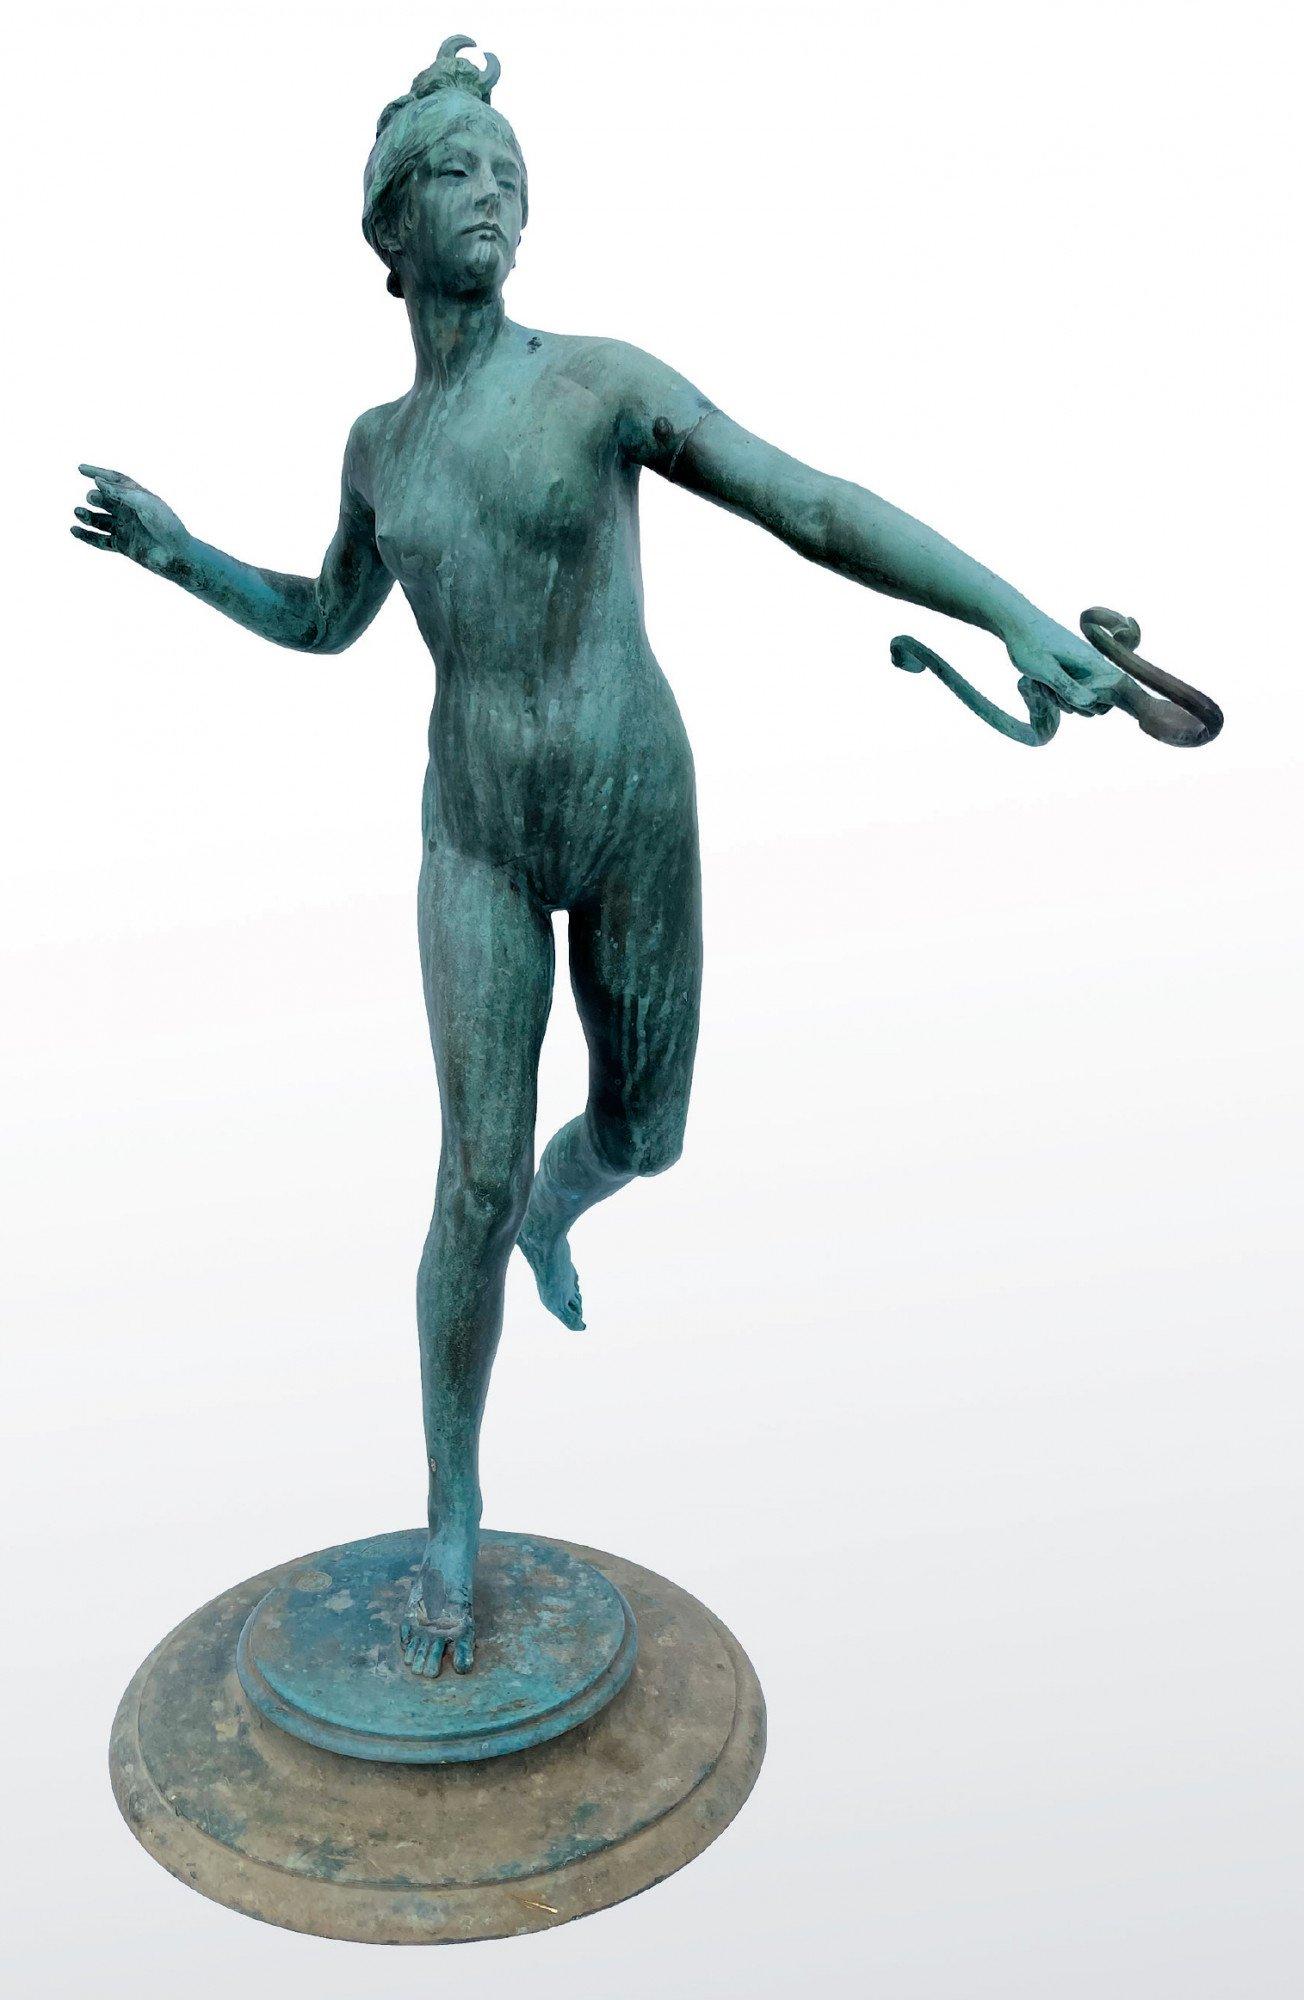 Frederick William MacMonnies (American, 1863-1937)
Diana, 1890
Bronze with green verdigris patina 
Signed and dated 
Copyright 1894 with Jaboeuf & Rouard, Paris foundry mark
31 x 21 x 17 inches 

A sculptor of classical figures, American-born